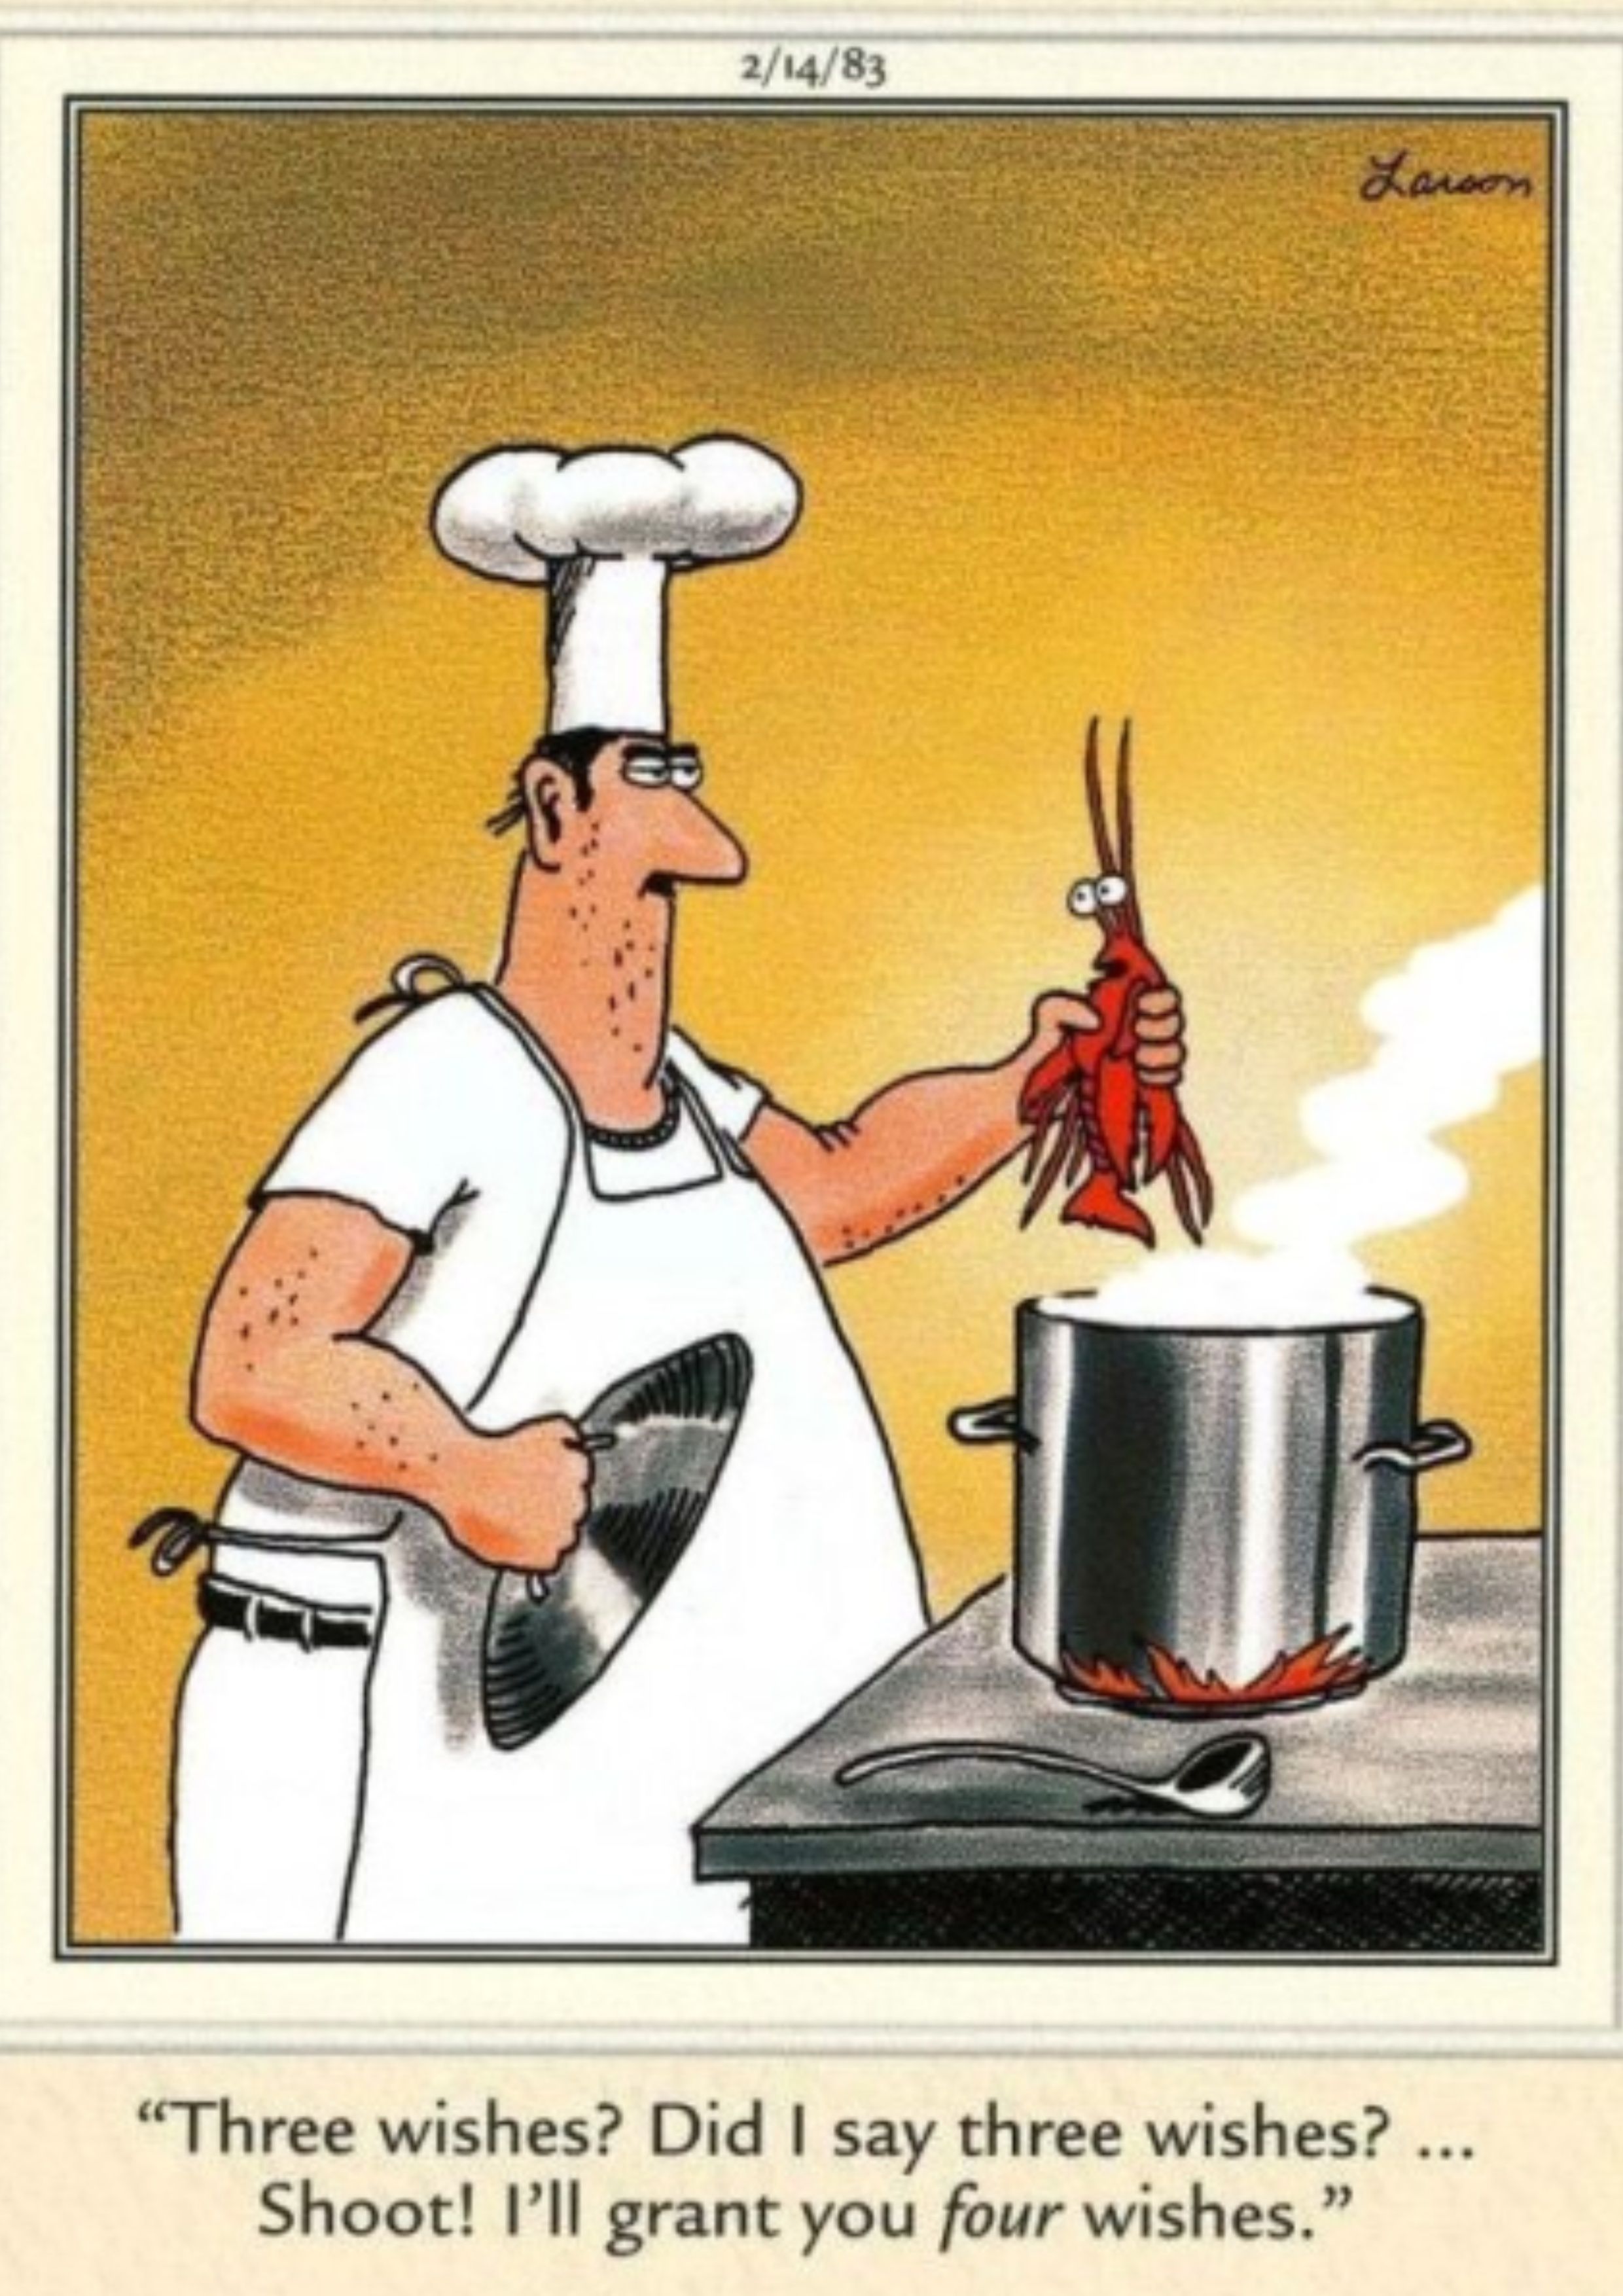 Chef holding lobster over a pot in the Far Side.